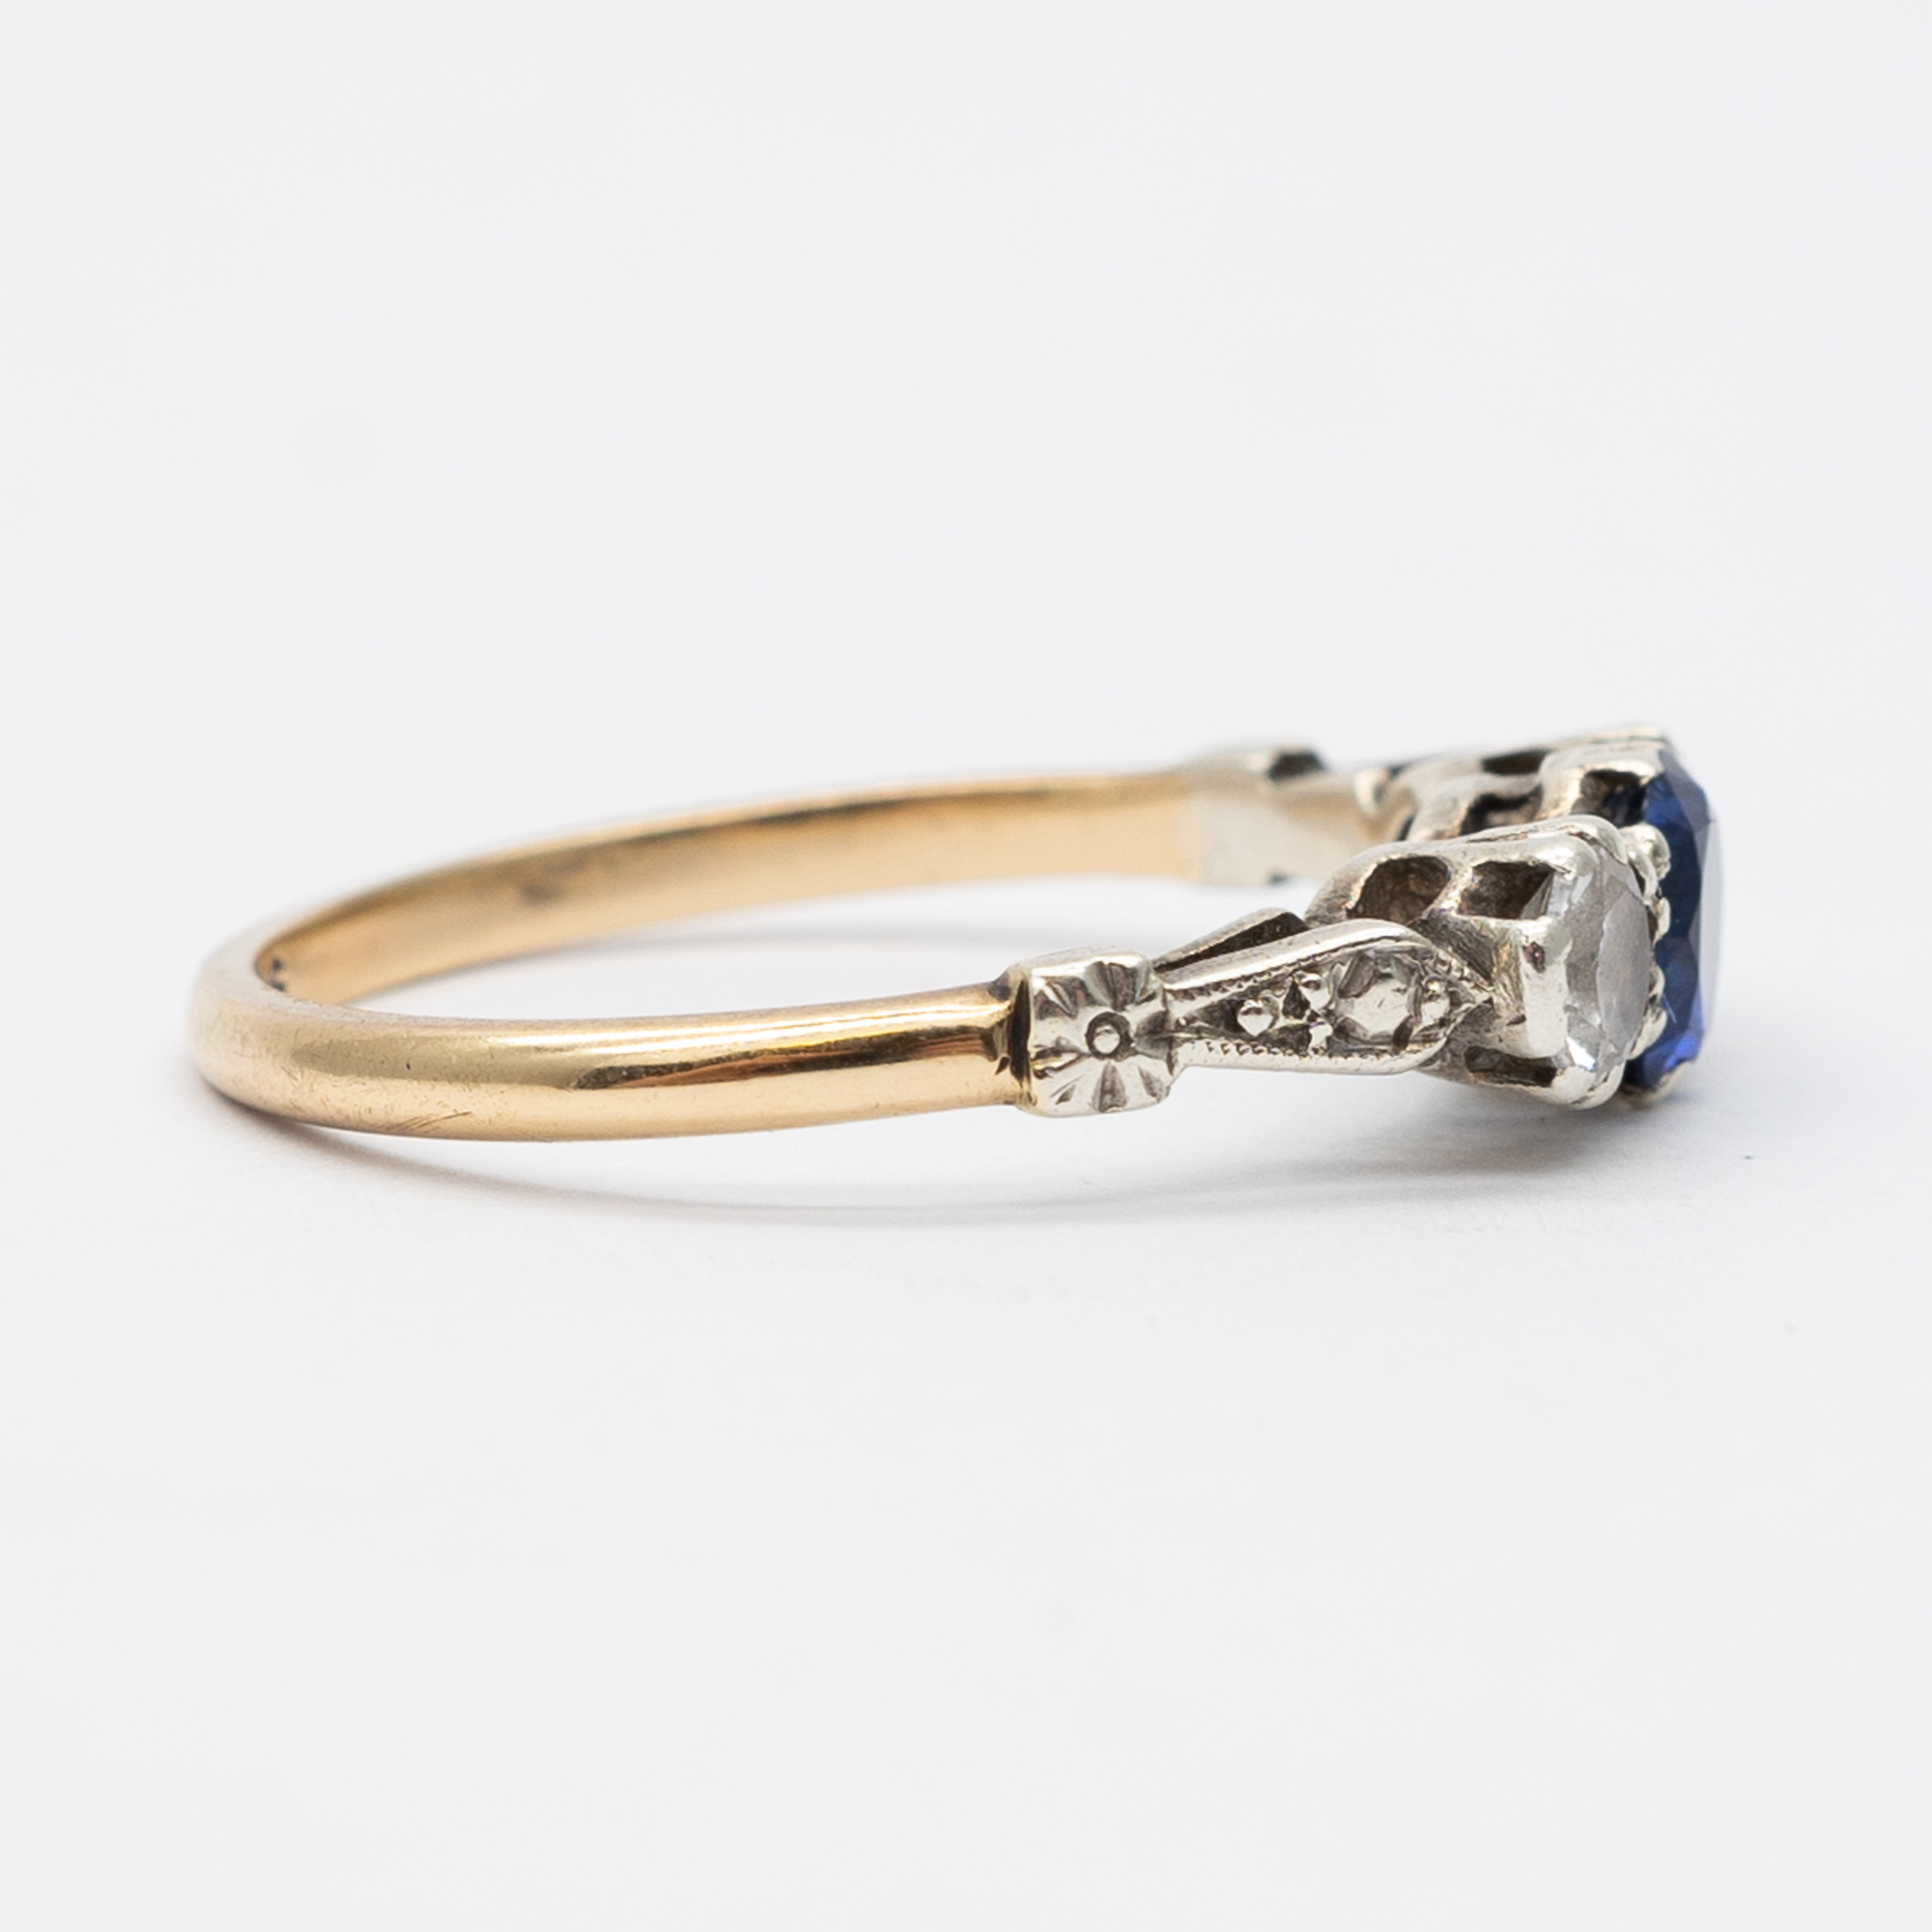 A 9ct yellow gold cz blue stone ring - Image 3 of 6